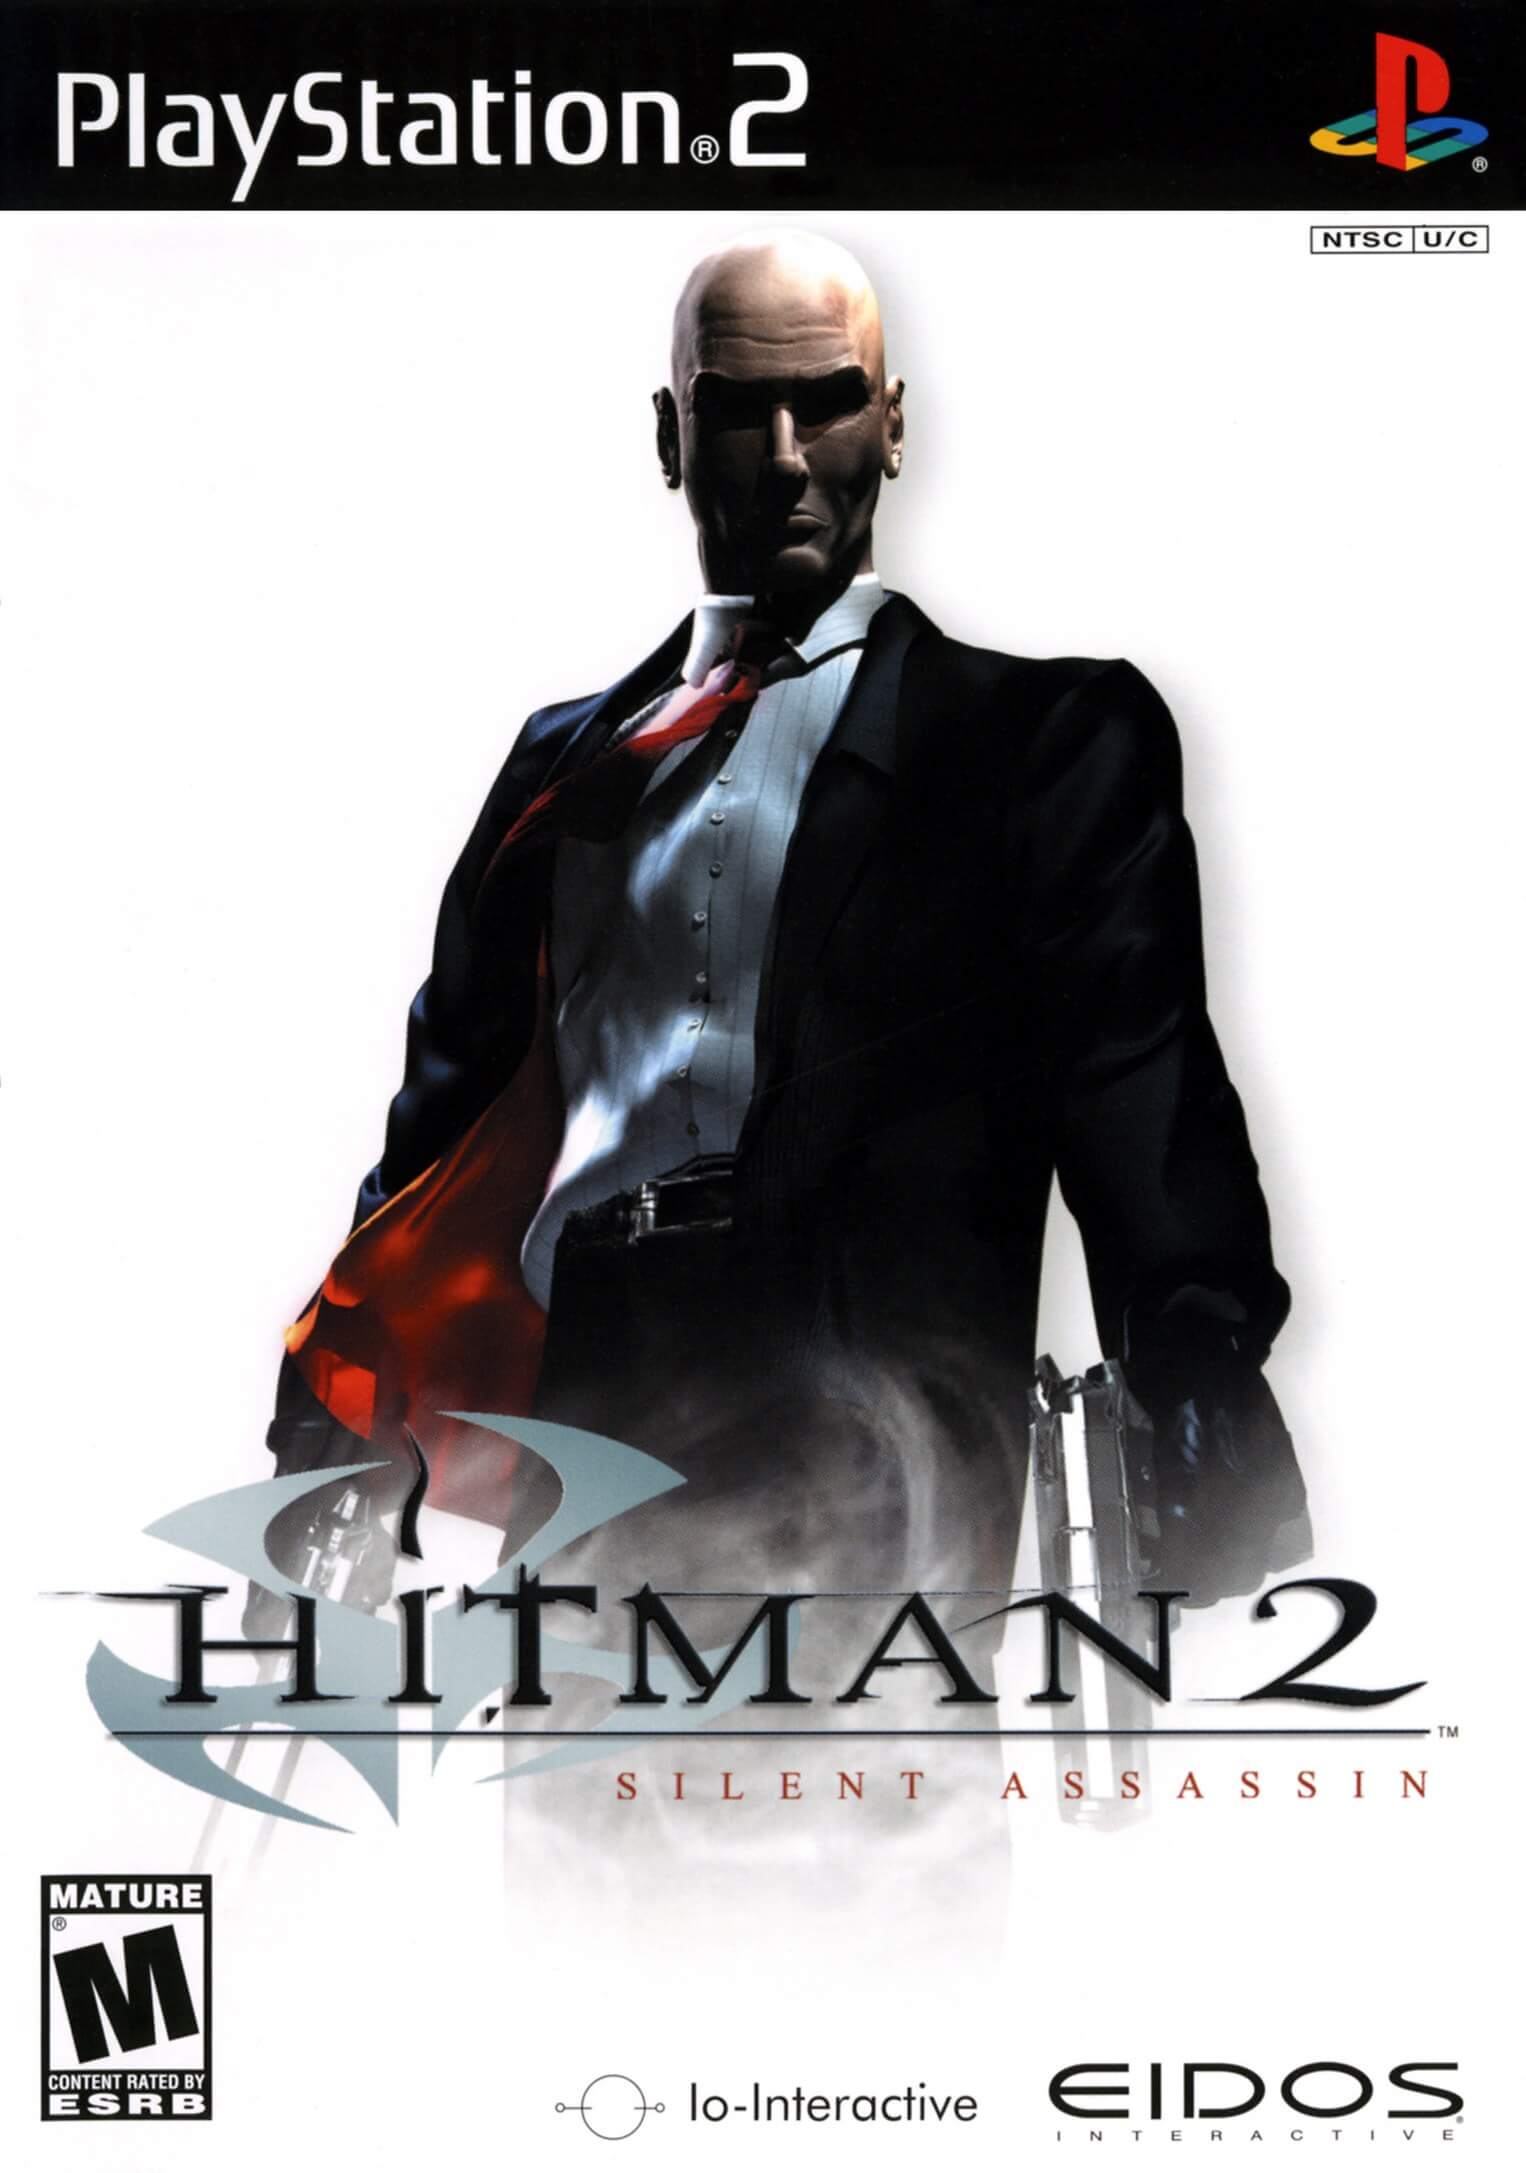 hitman-2-silent-assassin-ps2-rom-iso-game-download